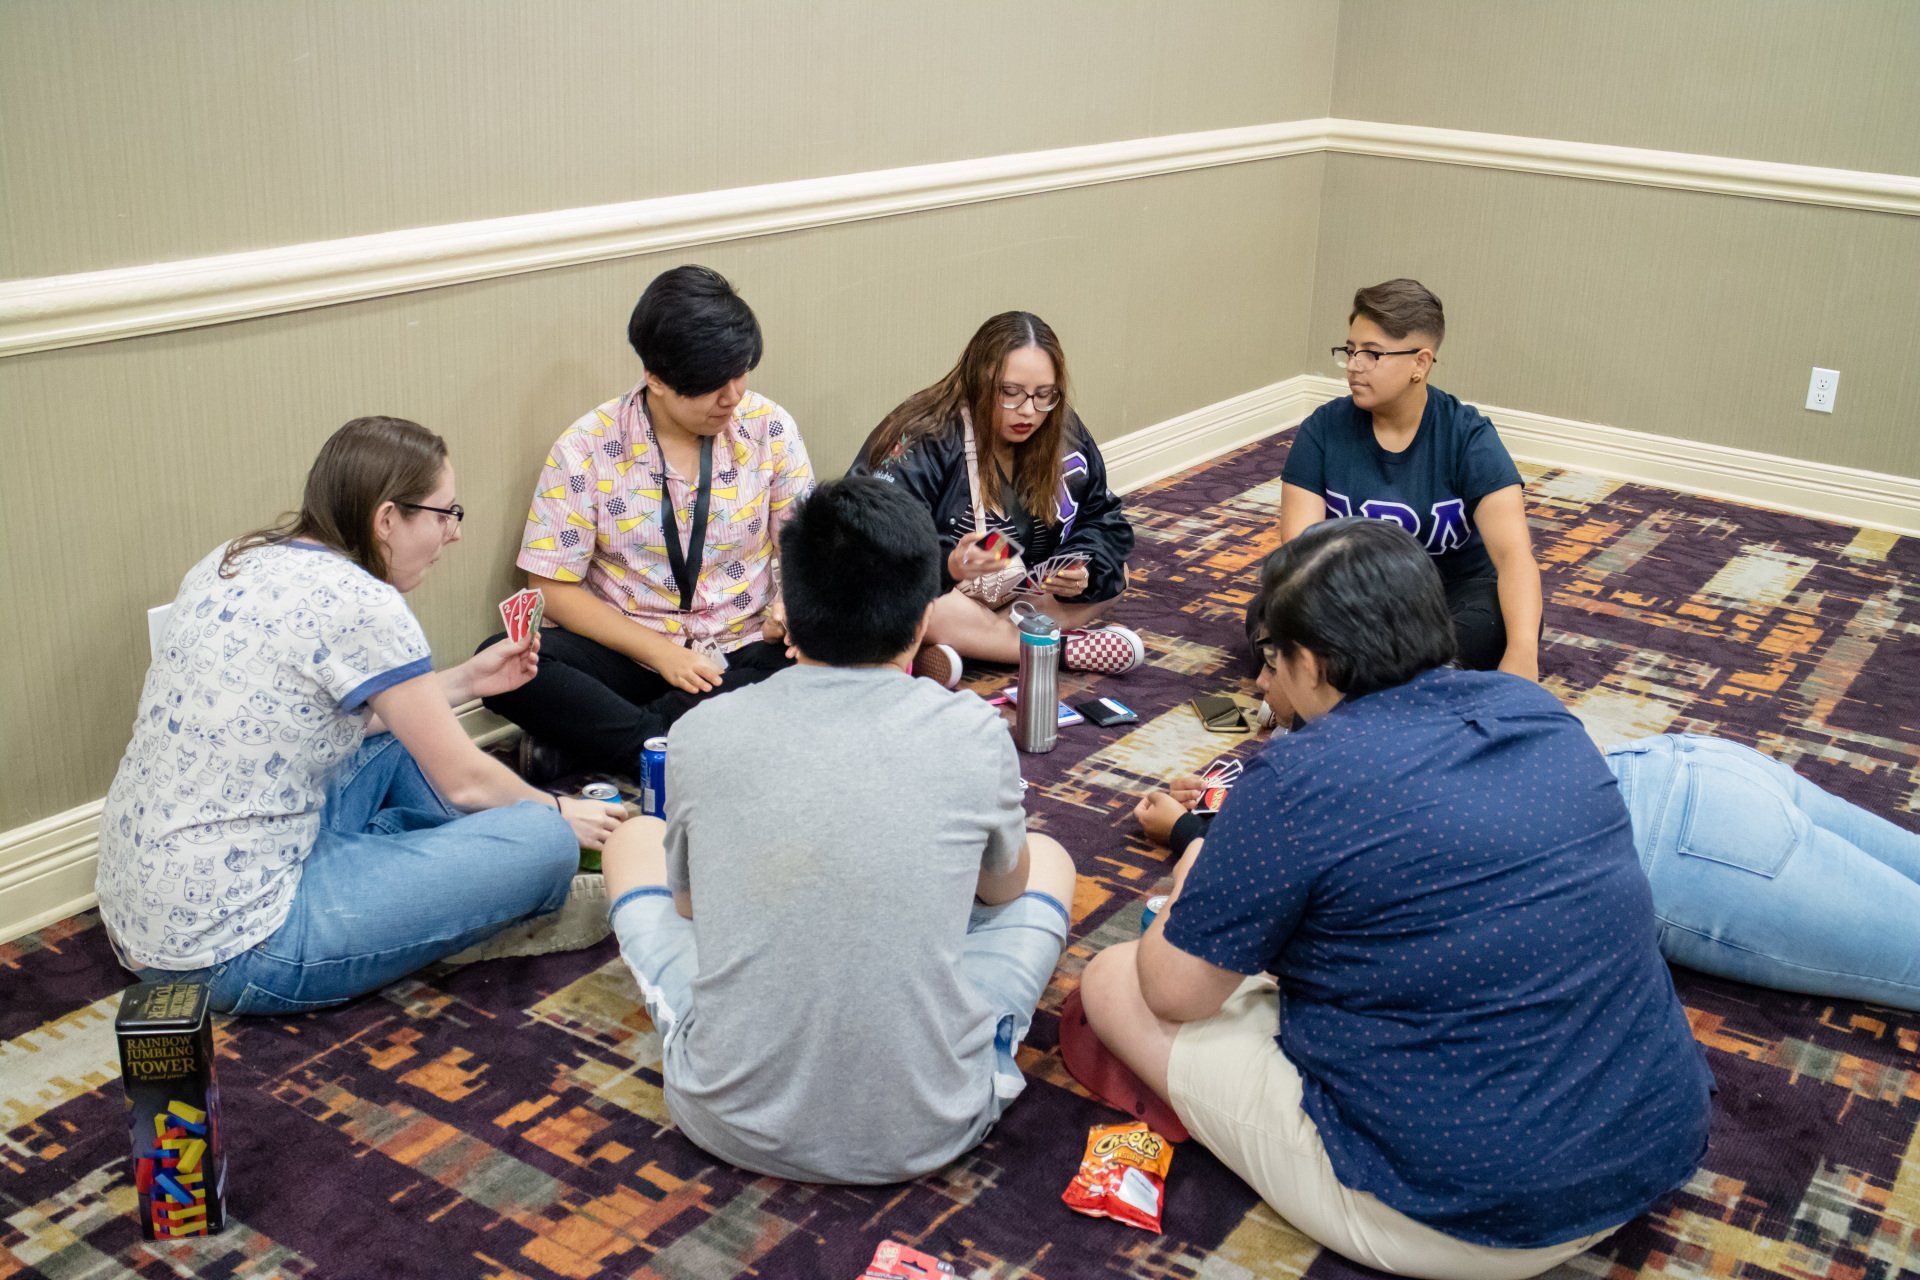 A large group of people siting on the floor, playing a game.